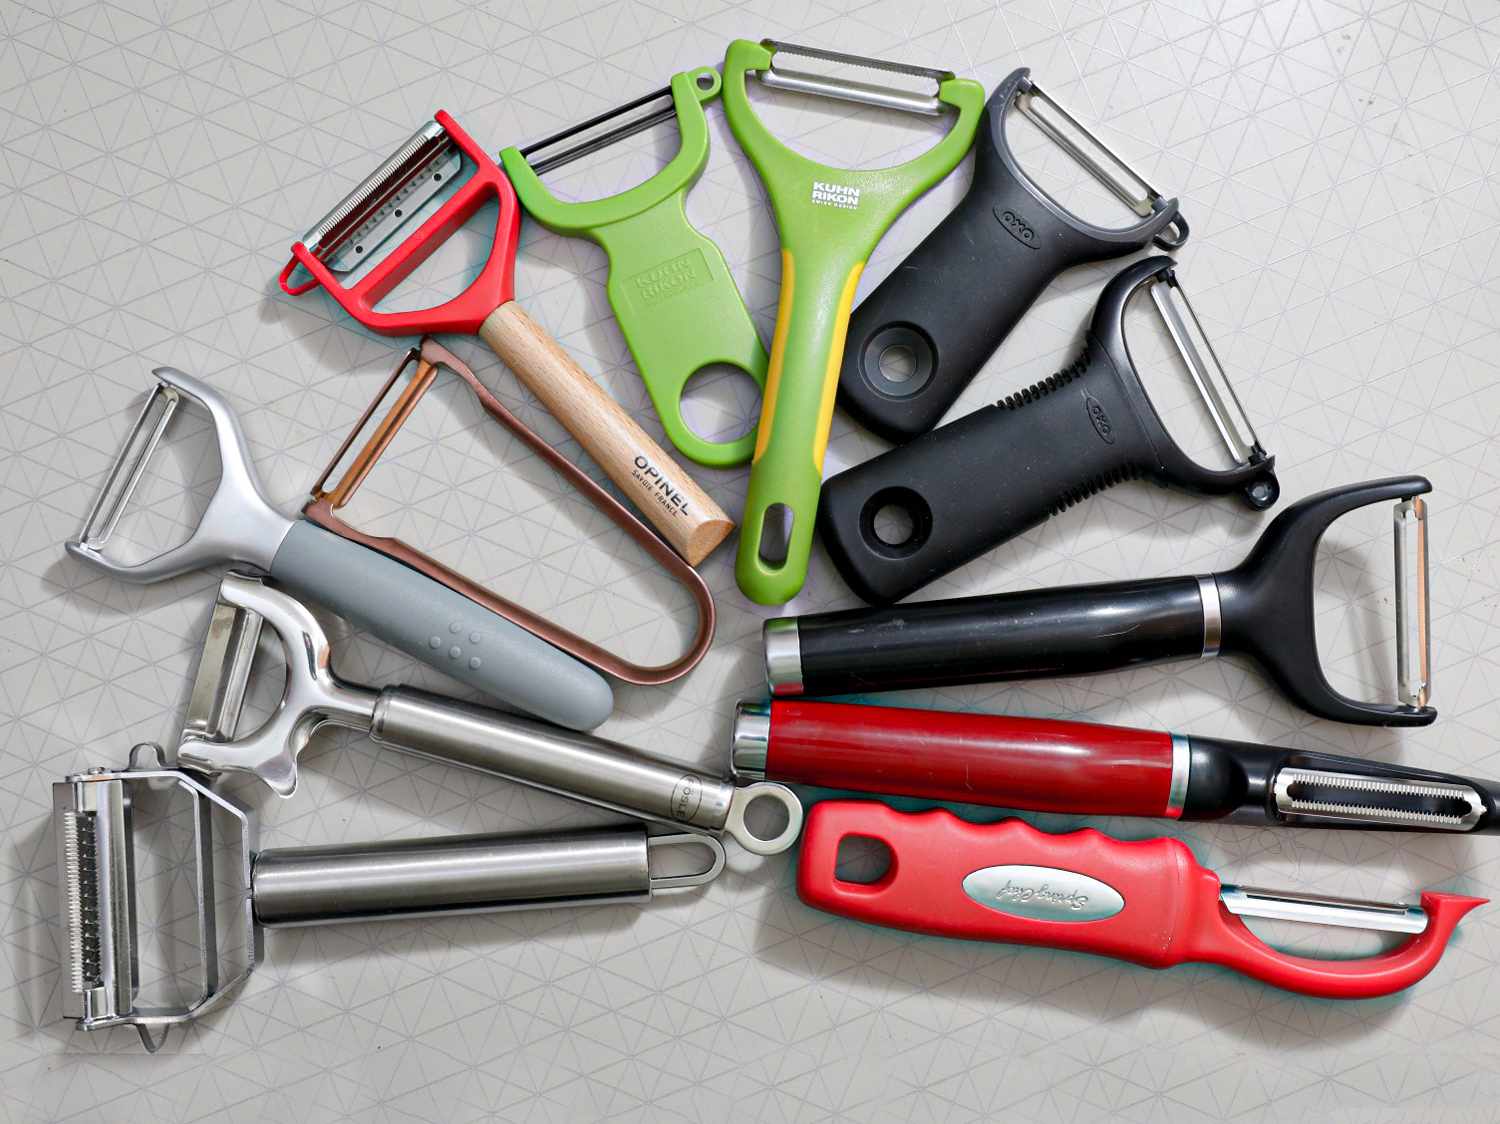 Top Vegetable Peeler Set Review: A Must-Have Kitchen Tool